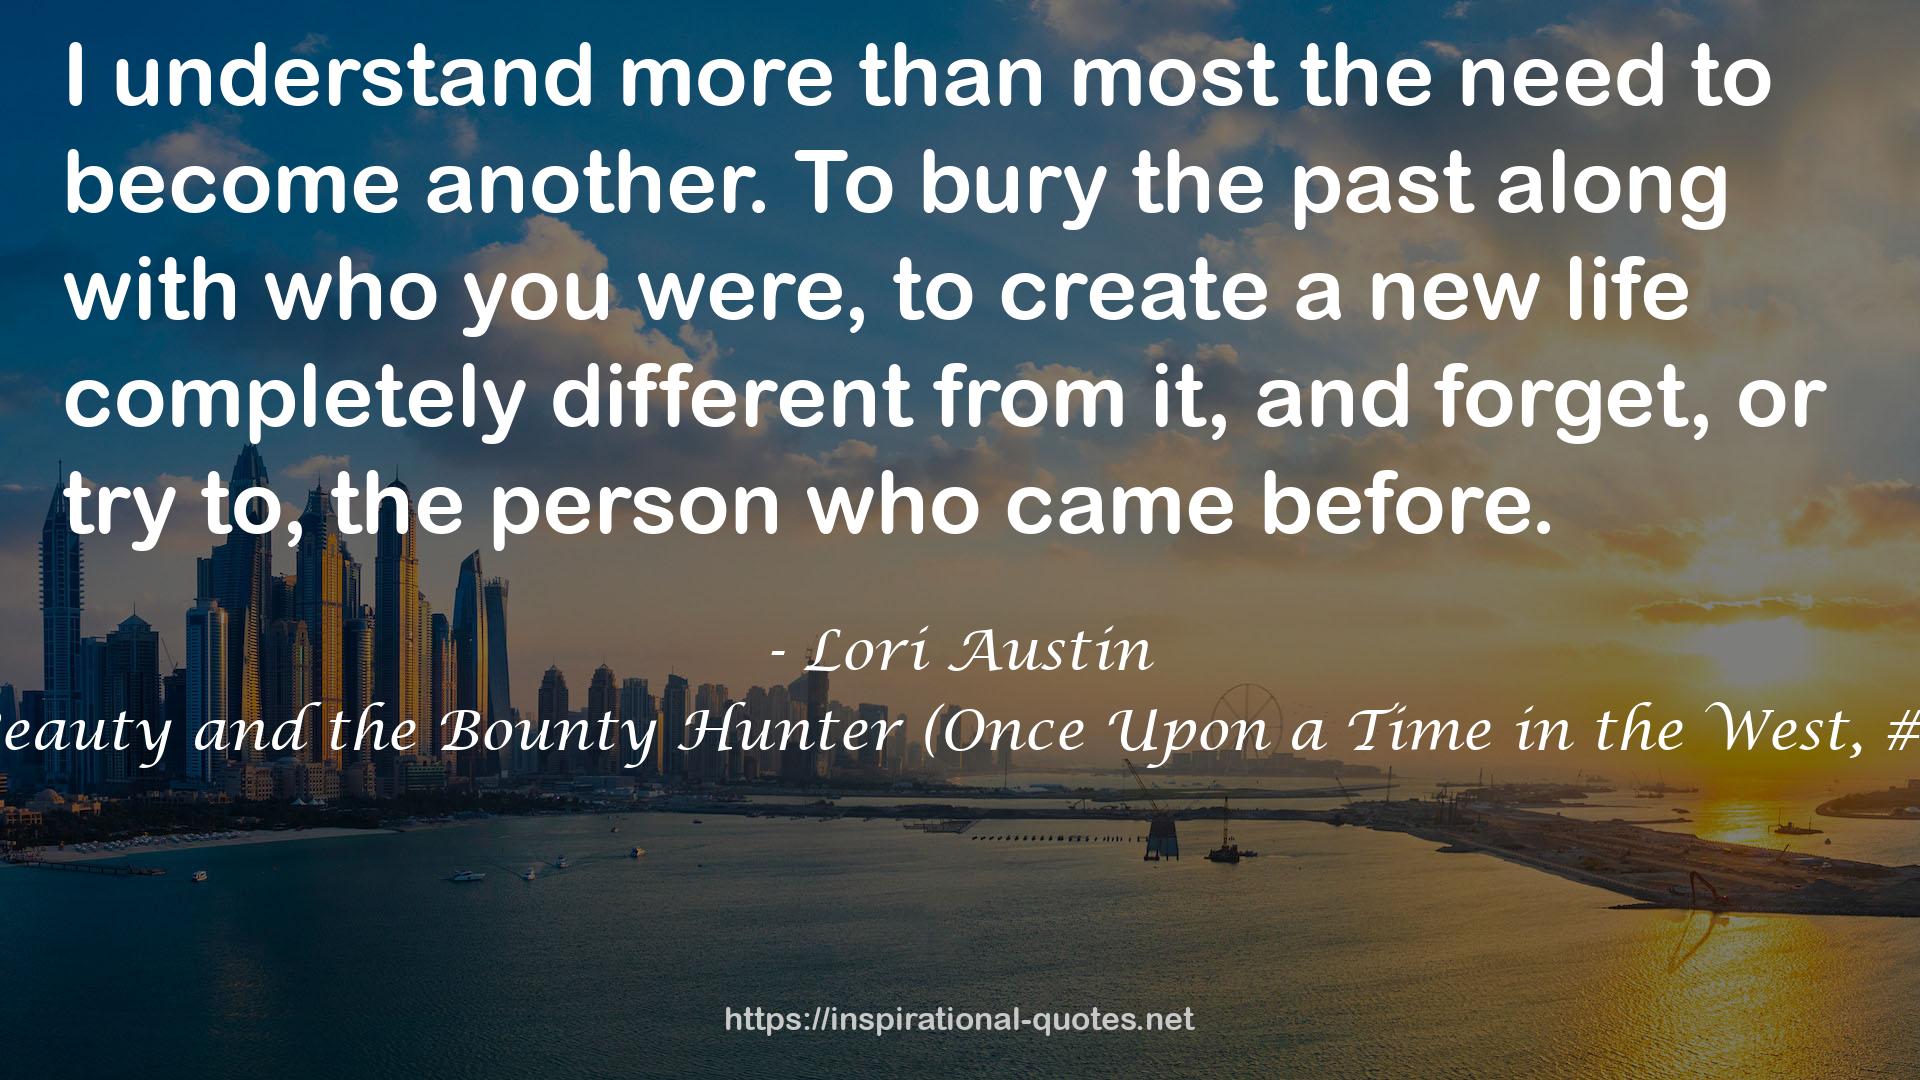 Beauty and the Bounty Hunter (Once Upon a Time in the West, #1) QUOTES